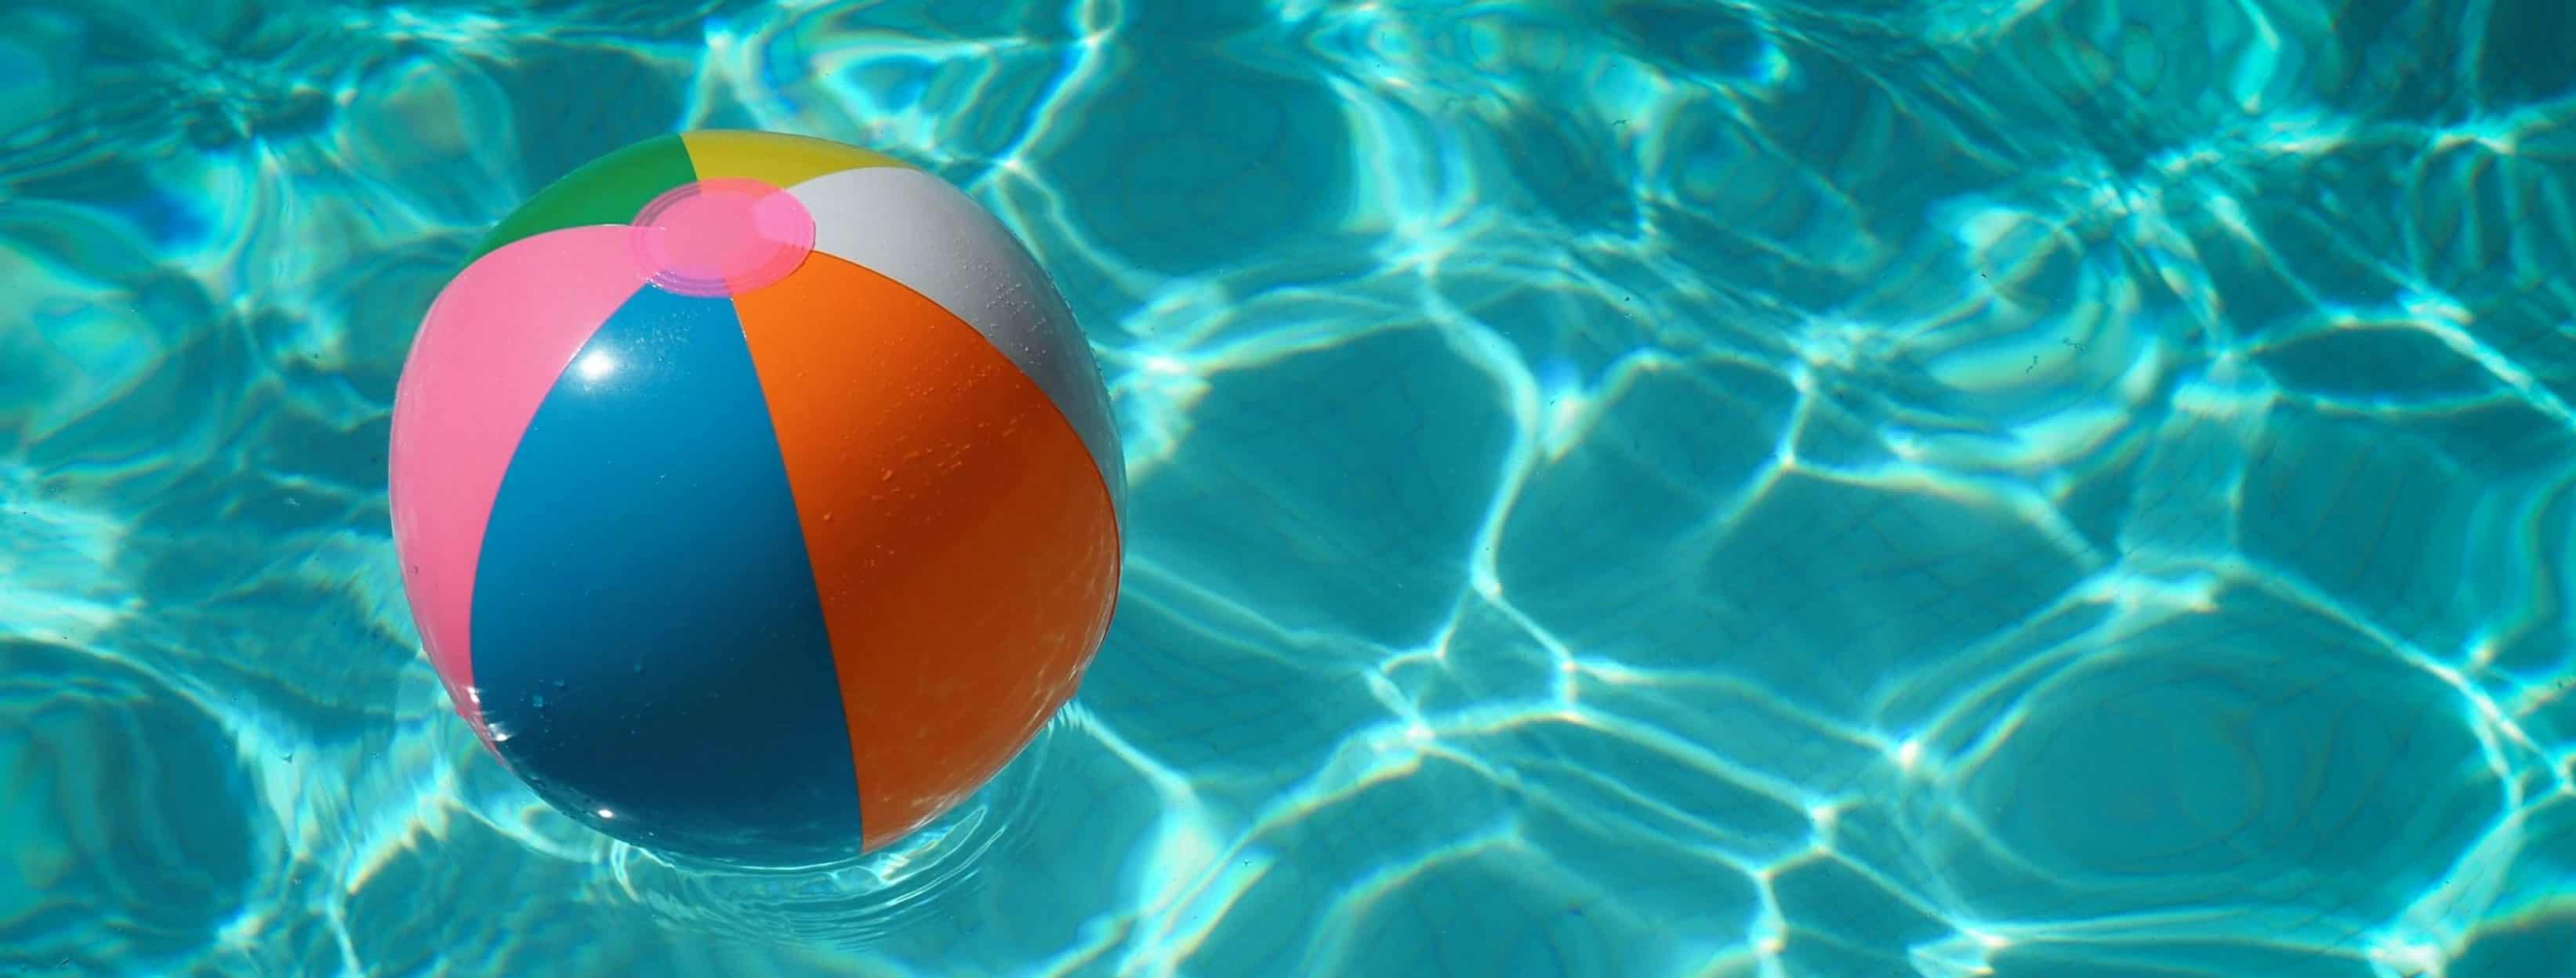 An image of a beach ball floating in pool water.